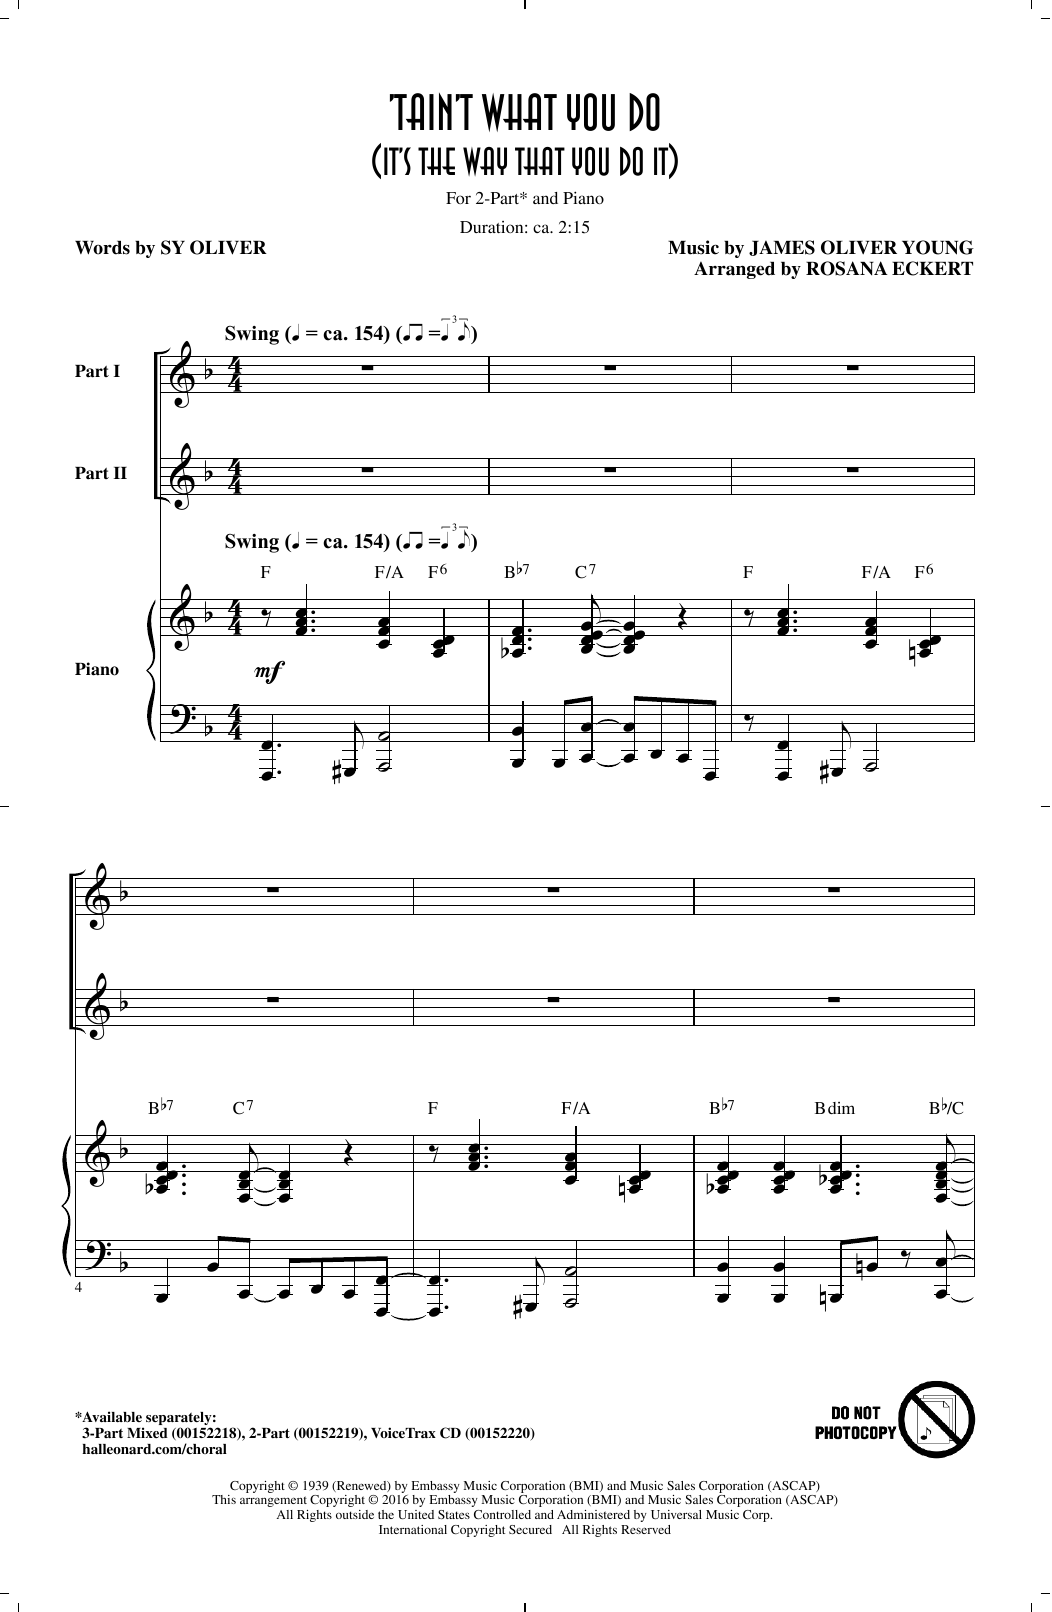 Rosana Eckert 'Tain't What You Do (It's The Way That Cha Do It) sheet music notes printable PDF score